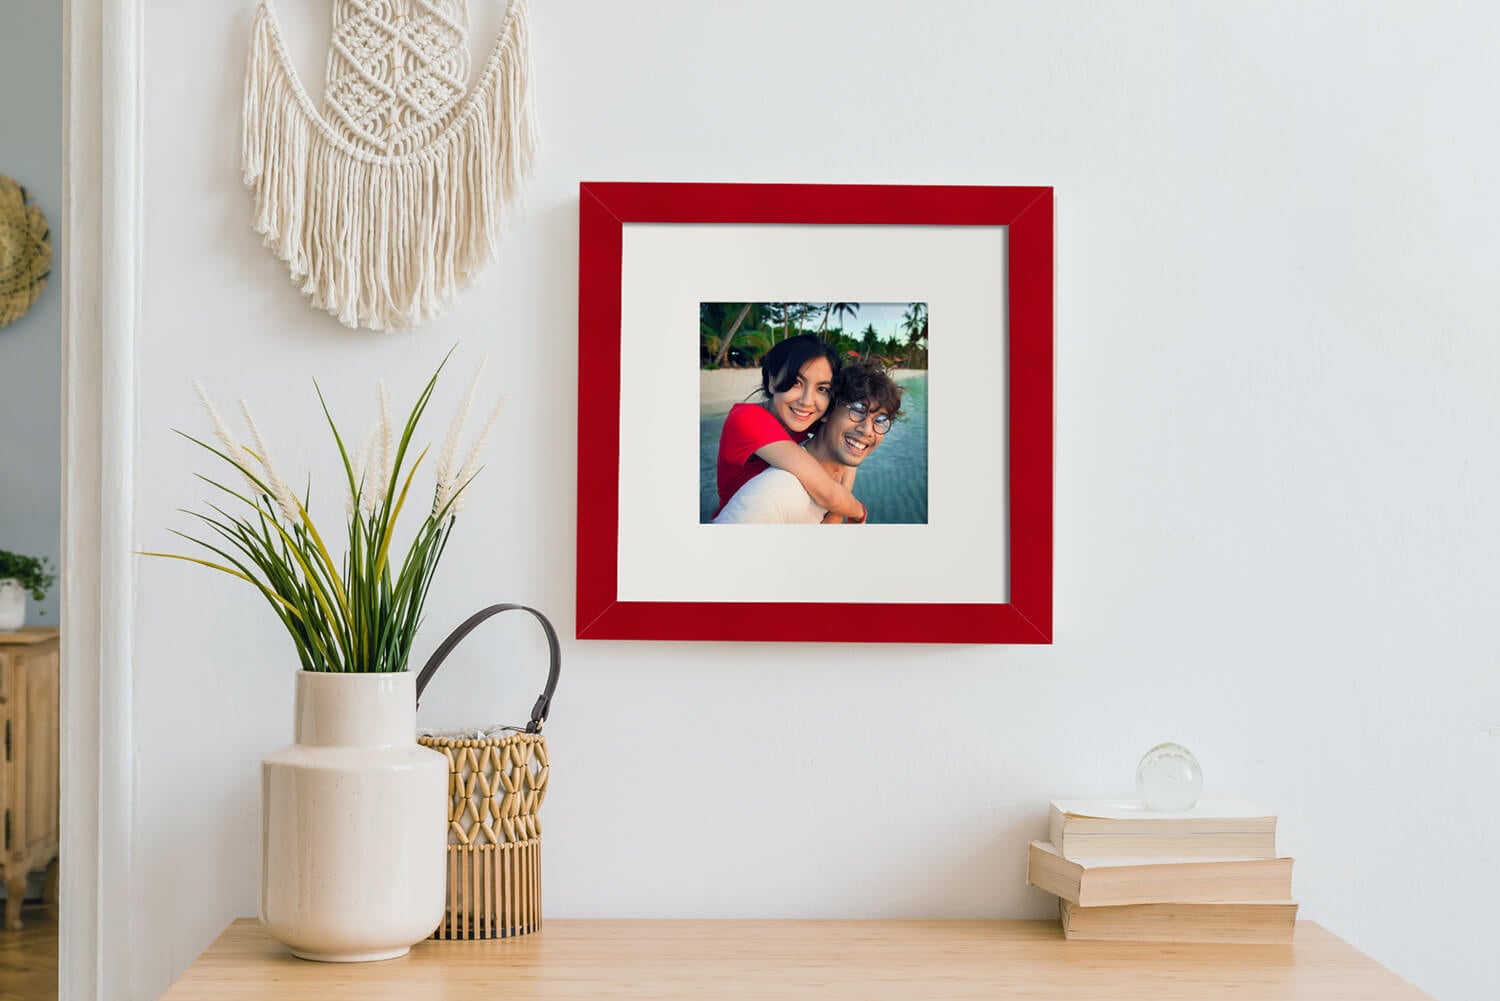 A Gorgeous Framed Print Just for You